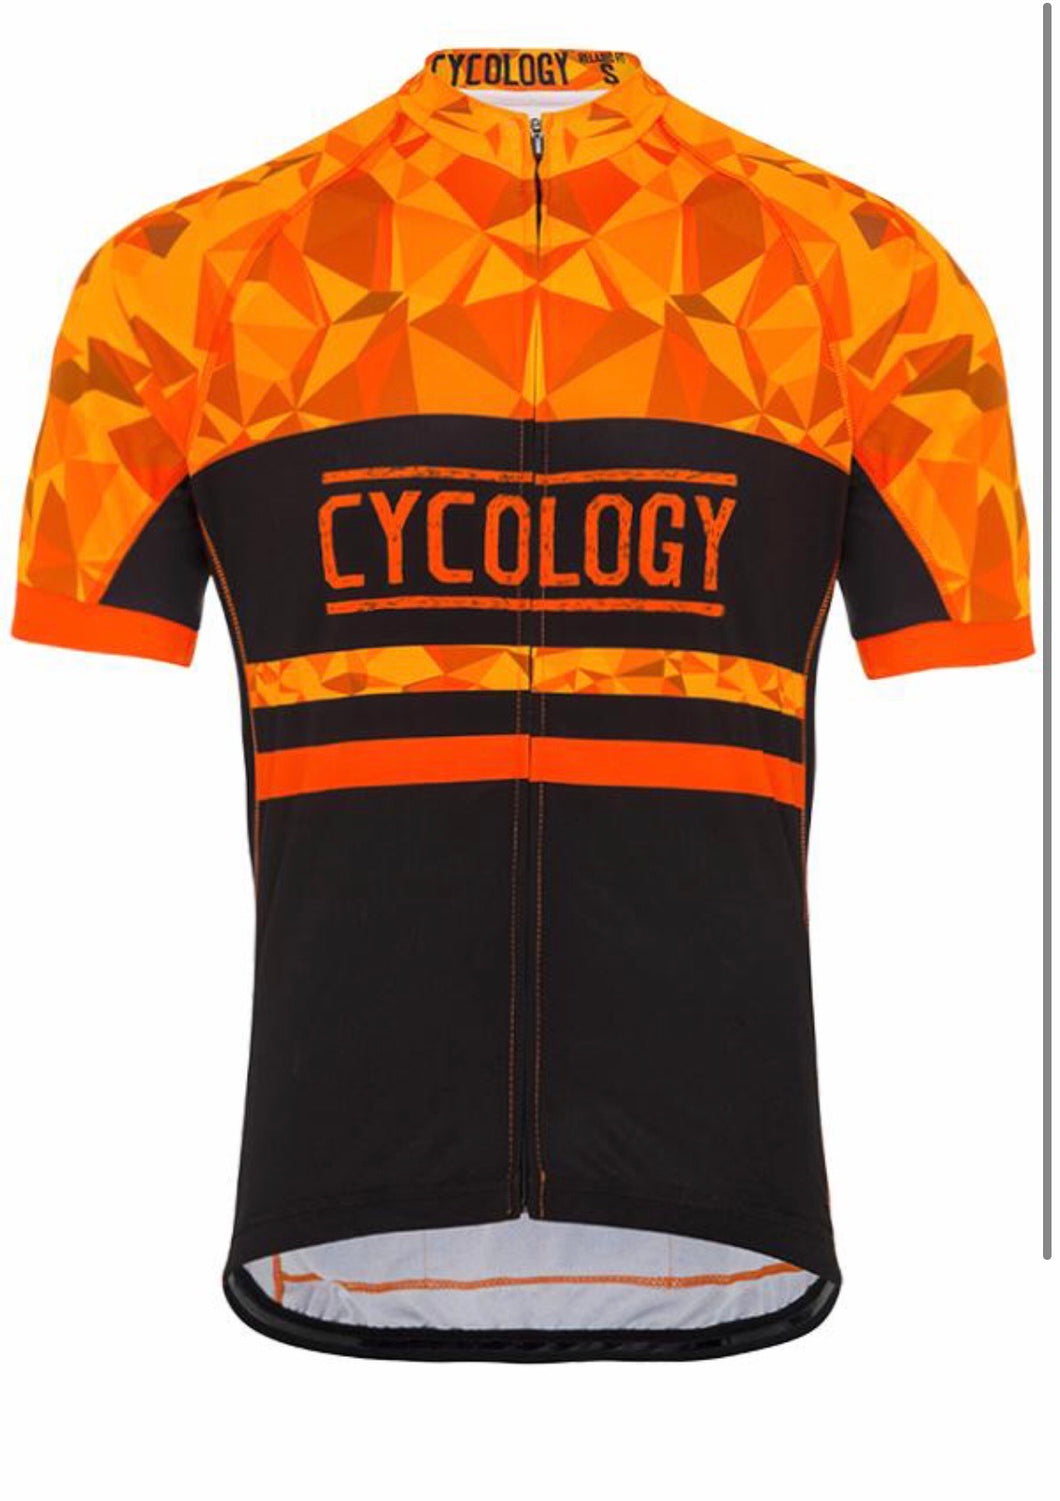 Cycology Quality Men's Relaxed Fit Jersey - Design Geometric Orange